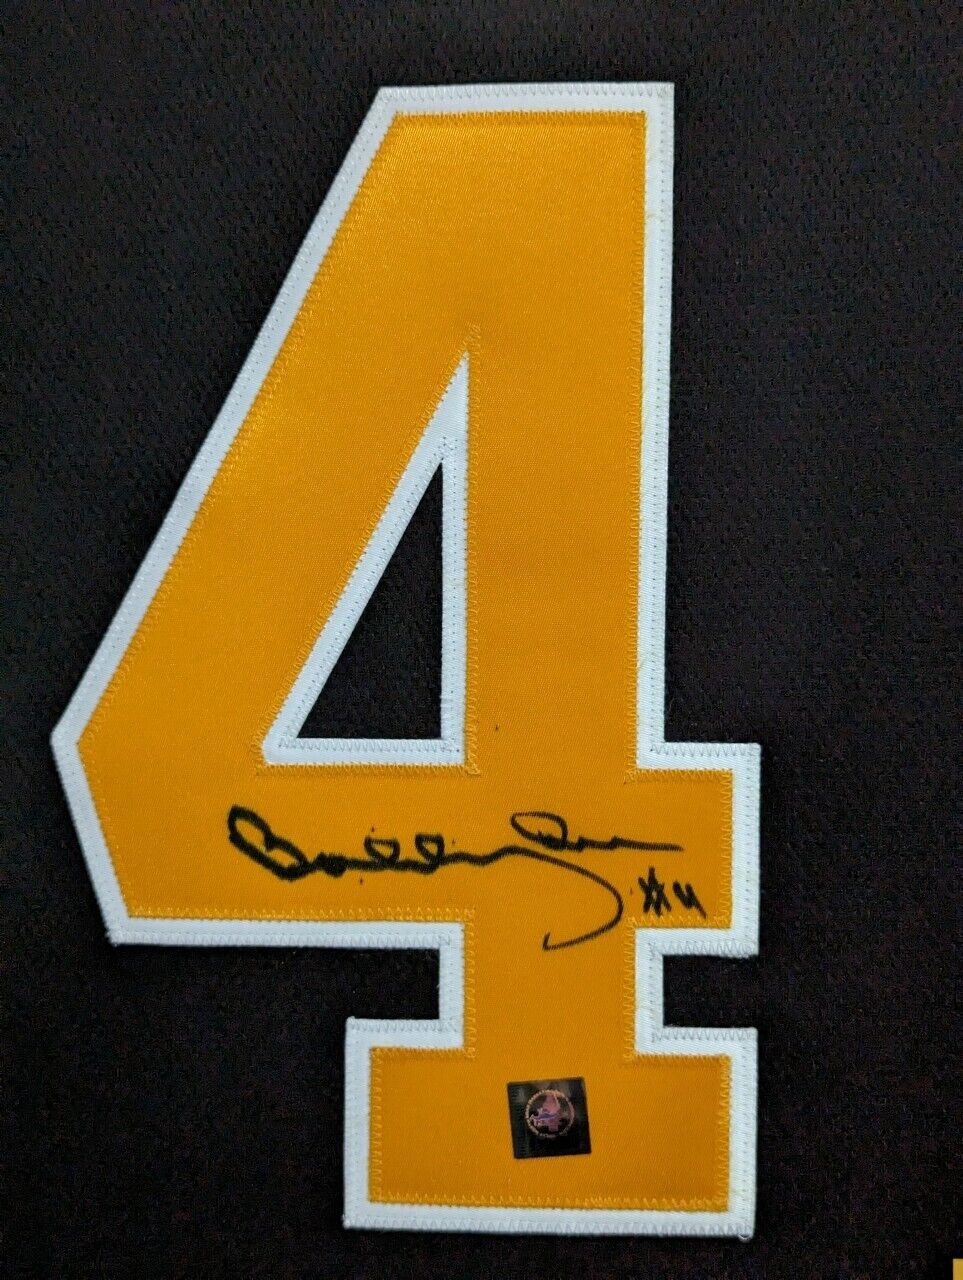 MVP Authentics Suede Framed Boston Bruins Bobby Orr Autographed Signed Jersey Orr Coa 1080 sports jersey framing , jersey framing